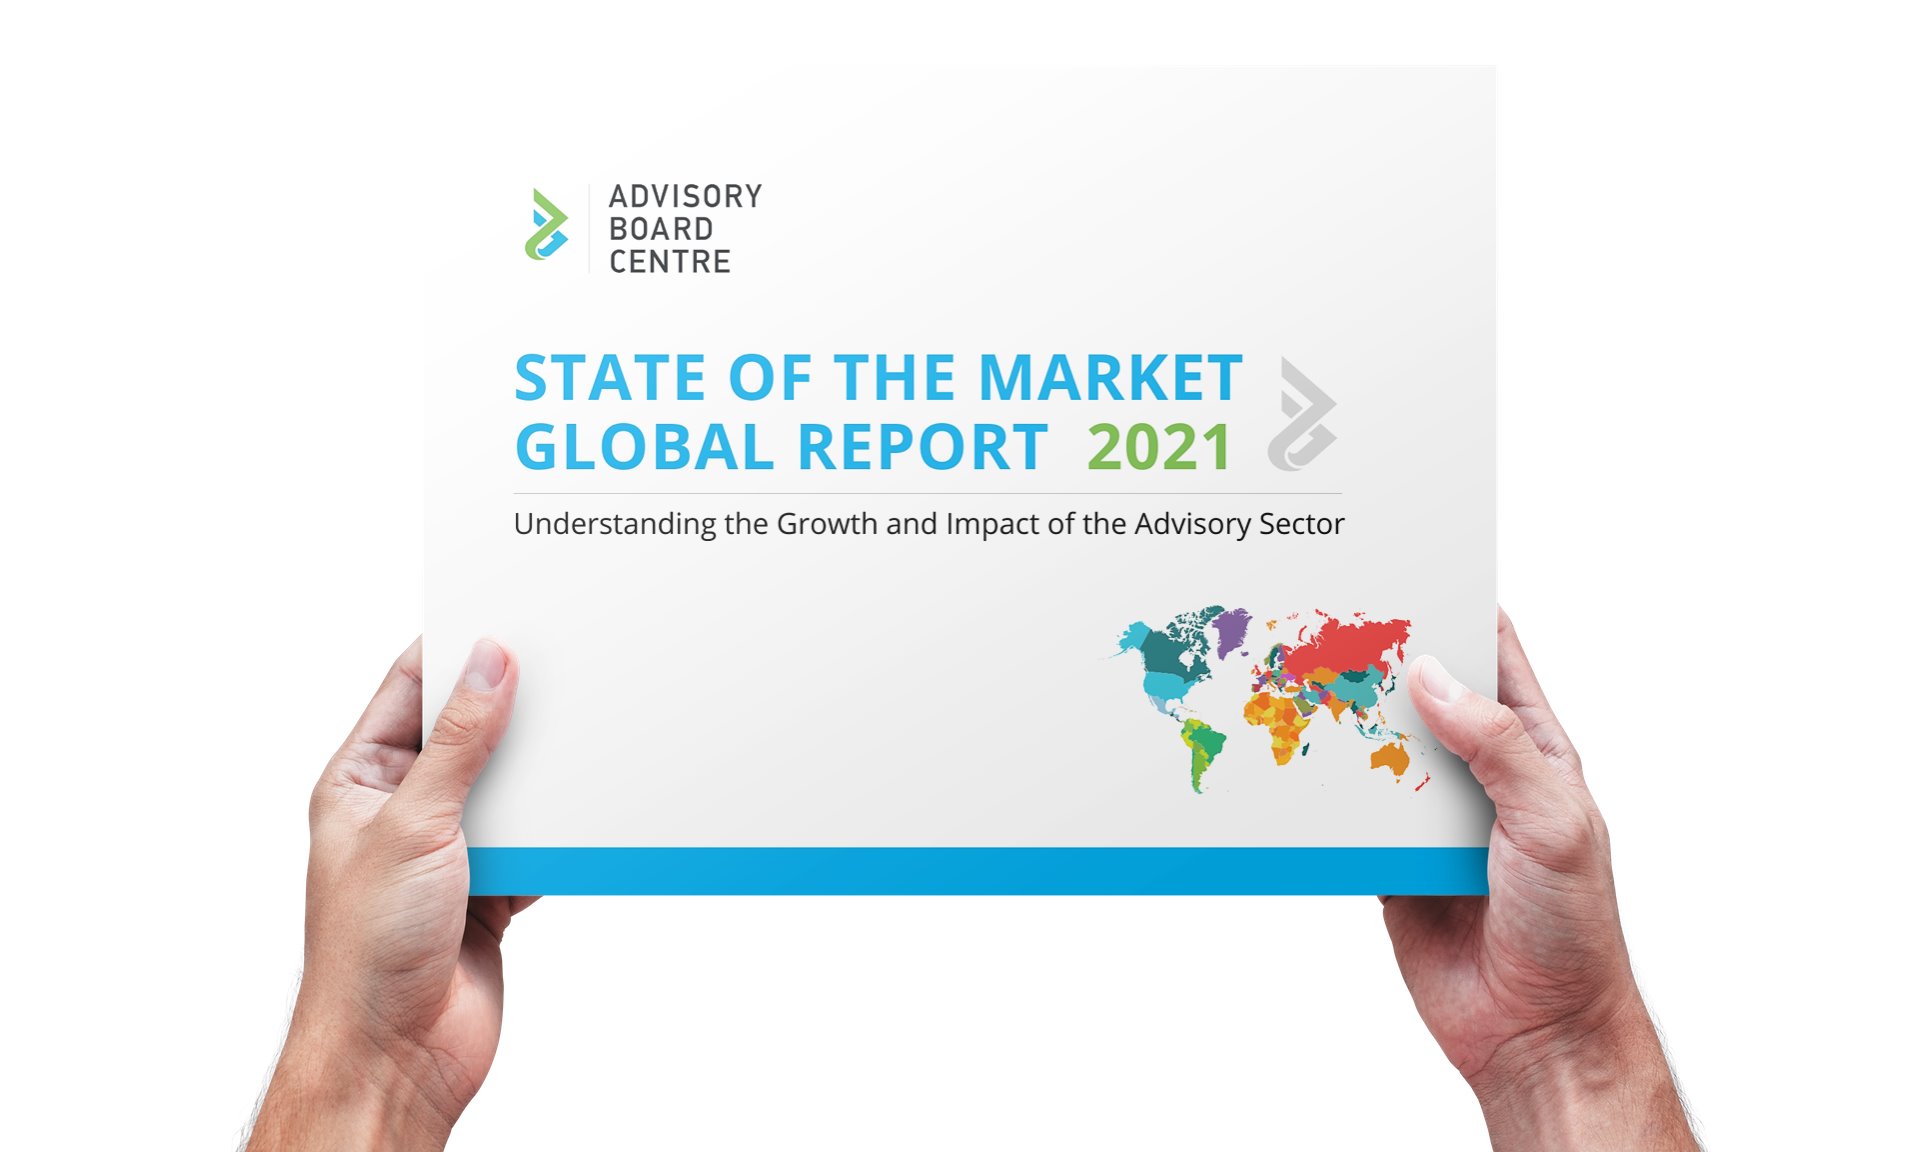 State of the Market Global Report 2021 | Advisory Board Centre